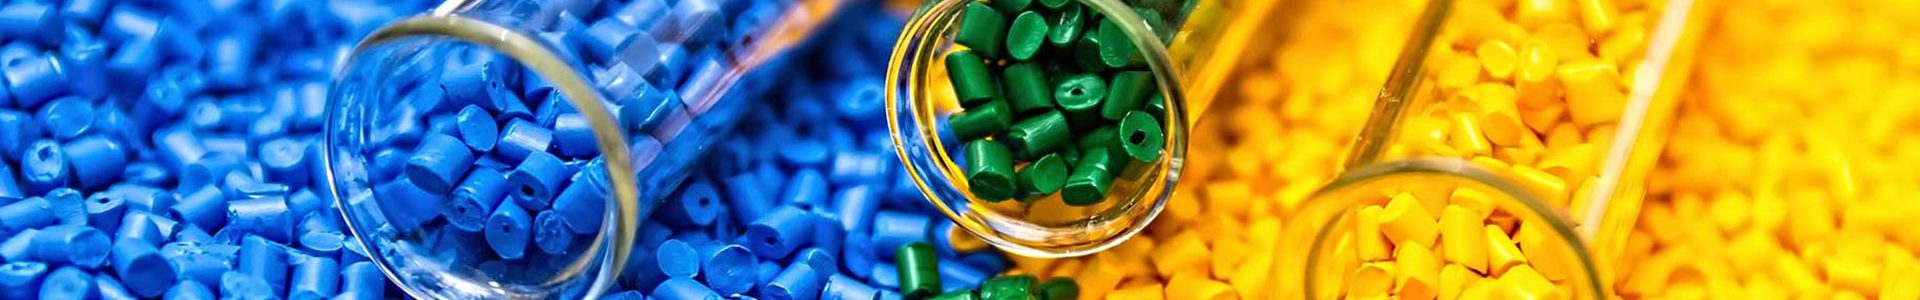 Reliable Plastic Polymers Supplier - Chemate